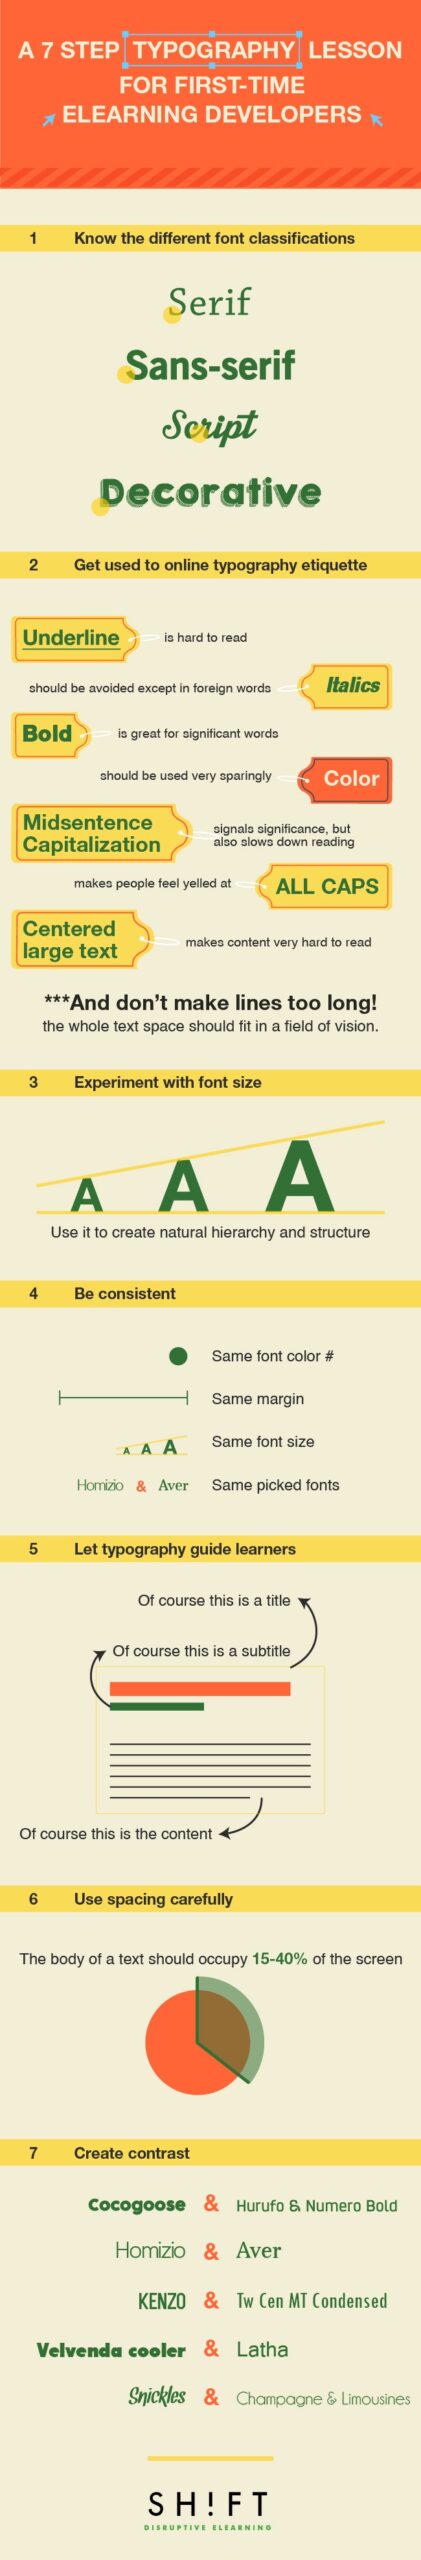 A Typography Lesson for eLearning Developers Infographic